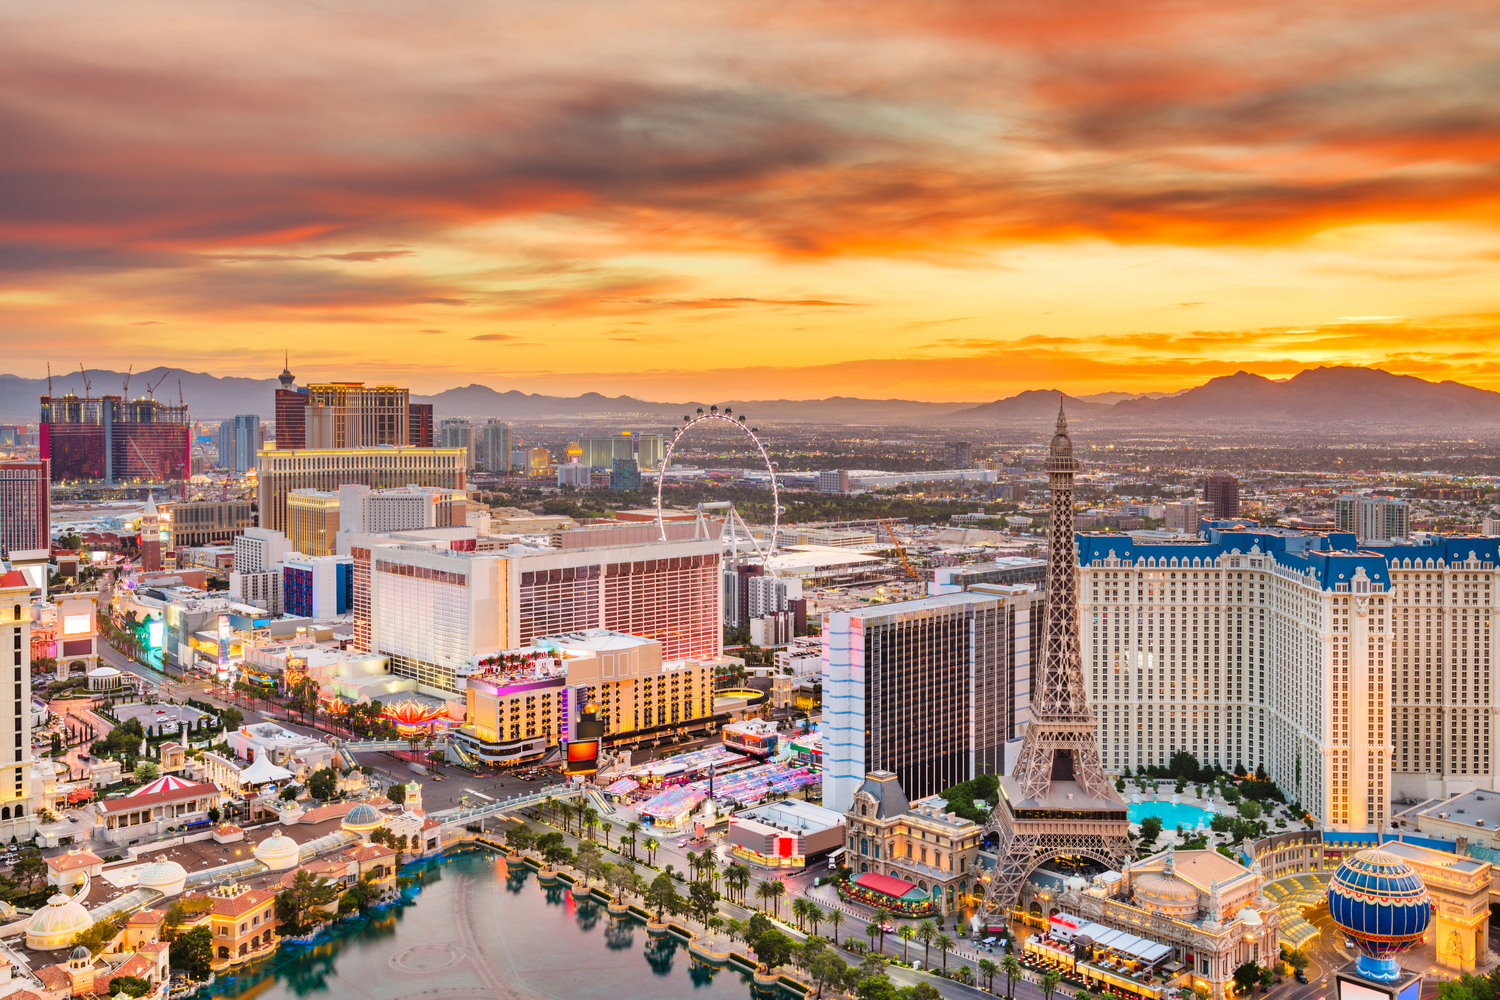 Las Vegas top 20 attractions and instagram spots you won't want to miss